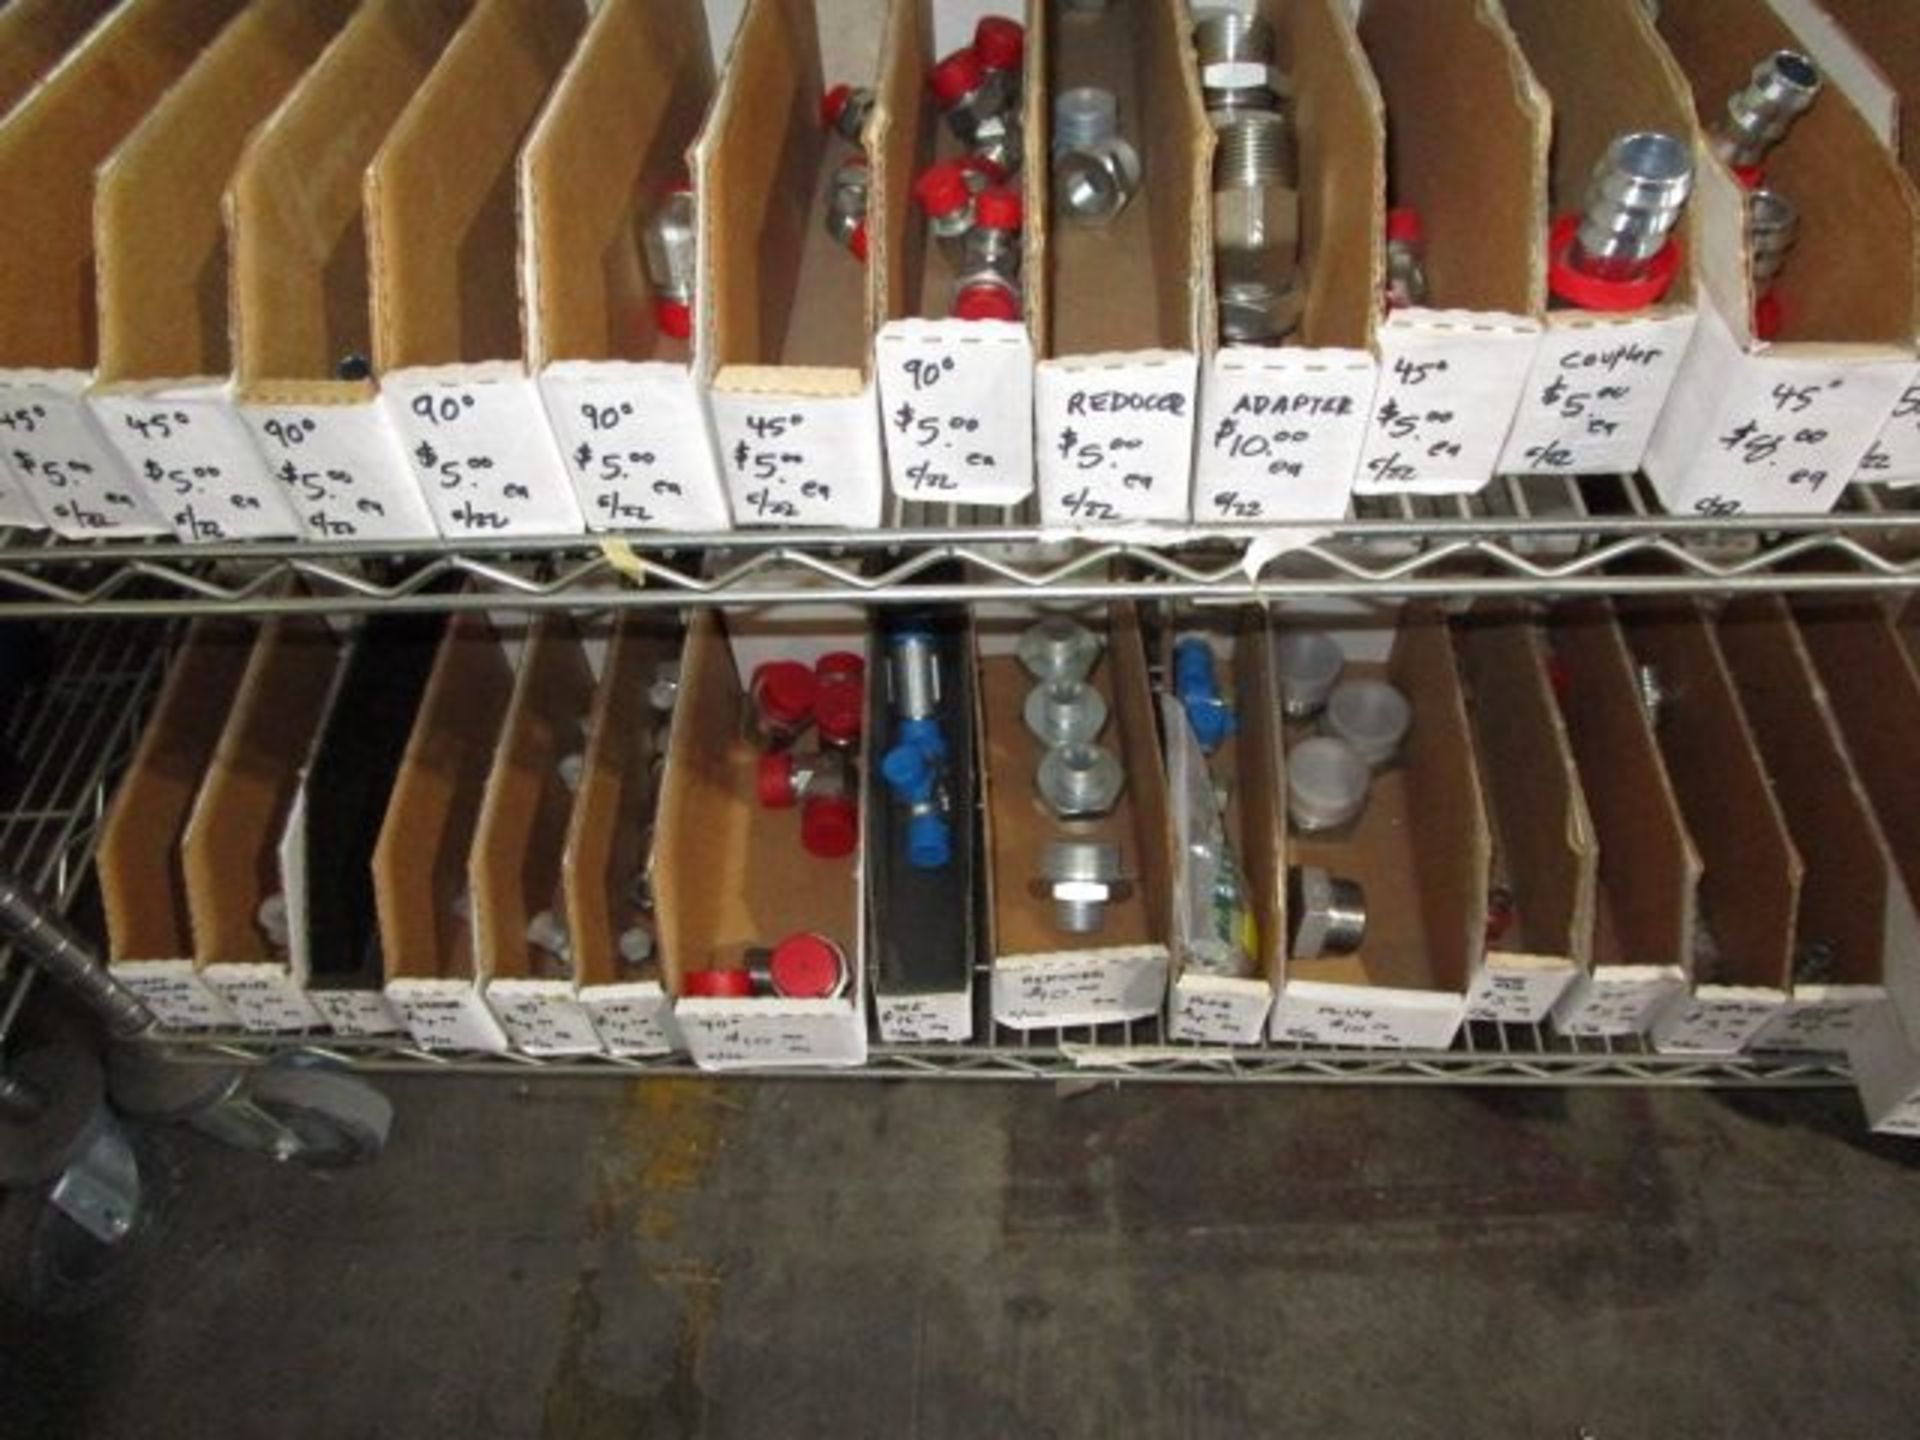 SHELVING UNIT OF BOLTS, QUICK RELEASES, 90 DEGREE CAPS - Image 5 of 6